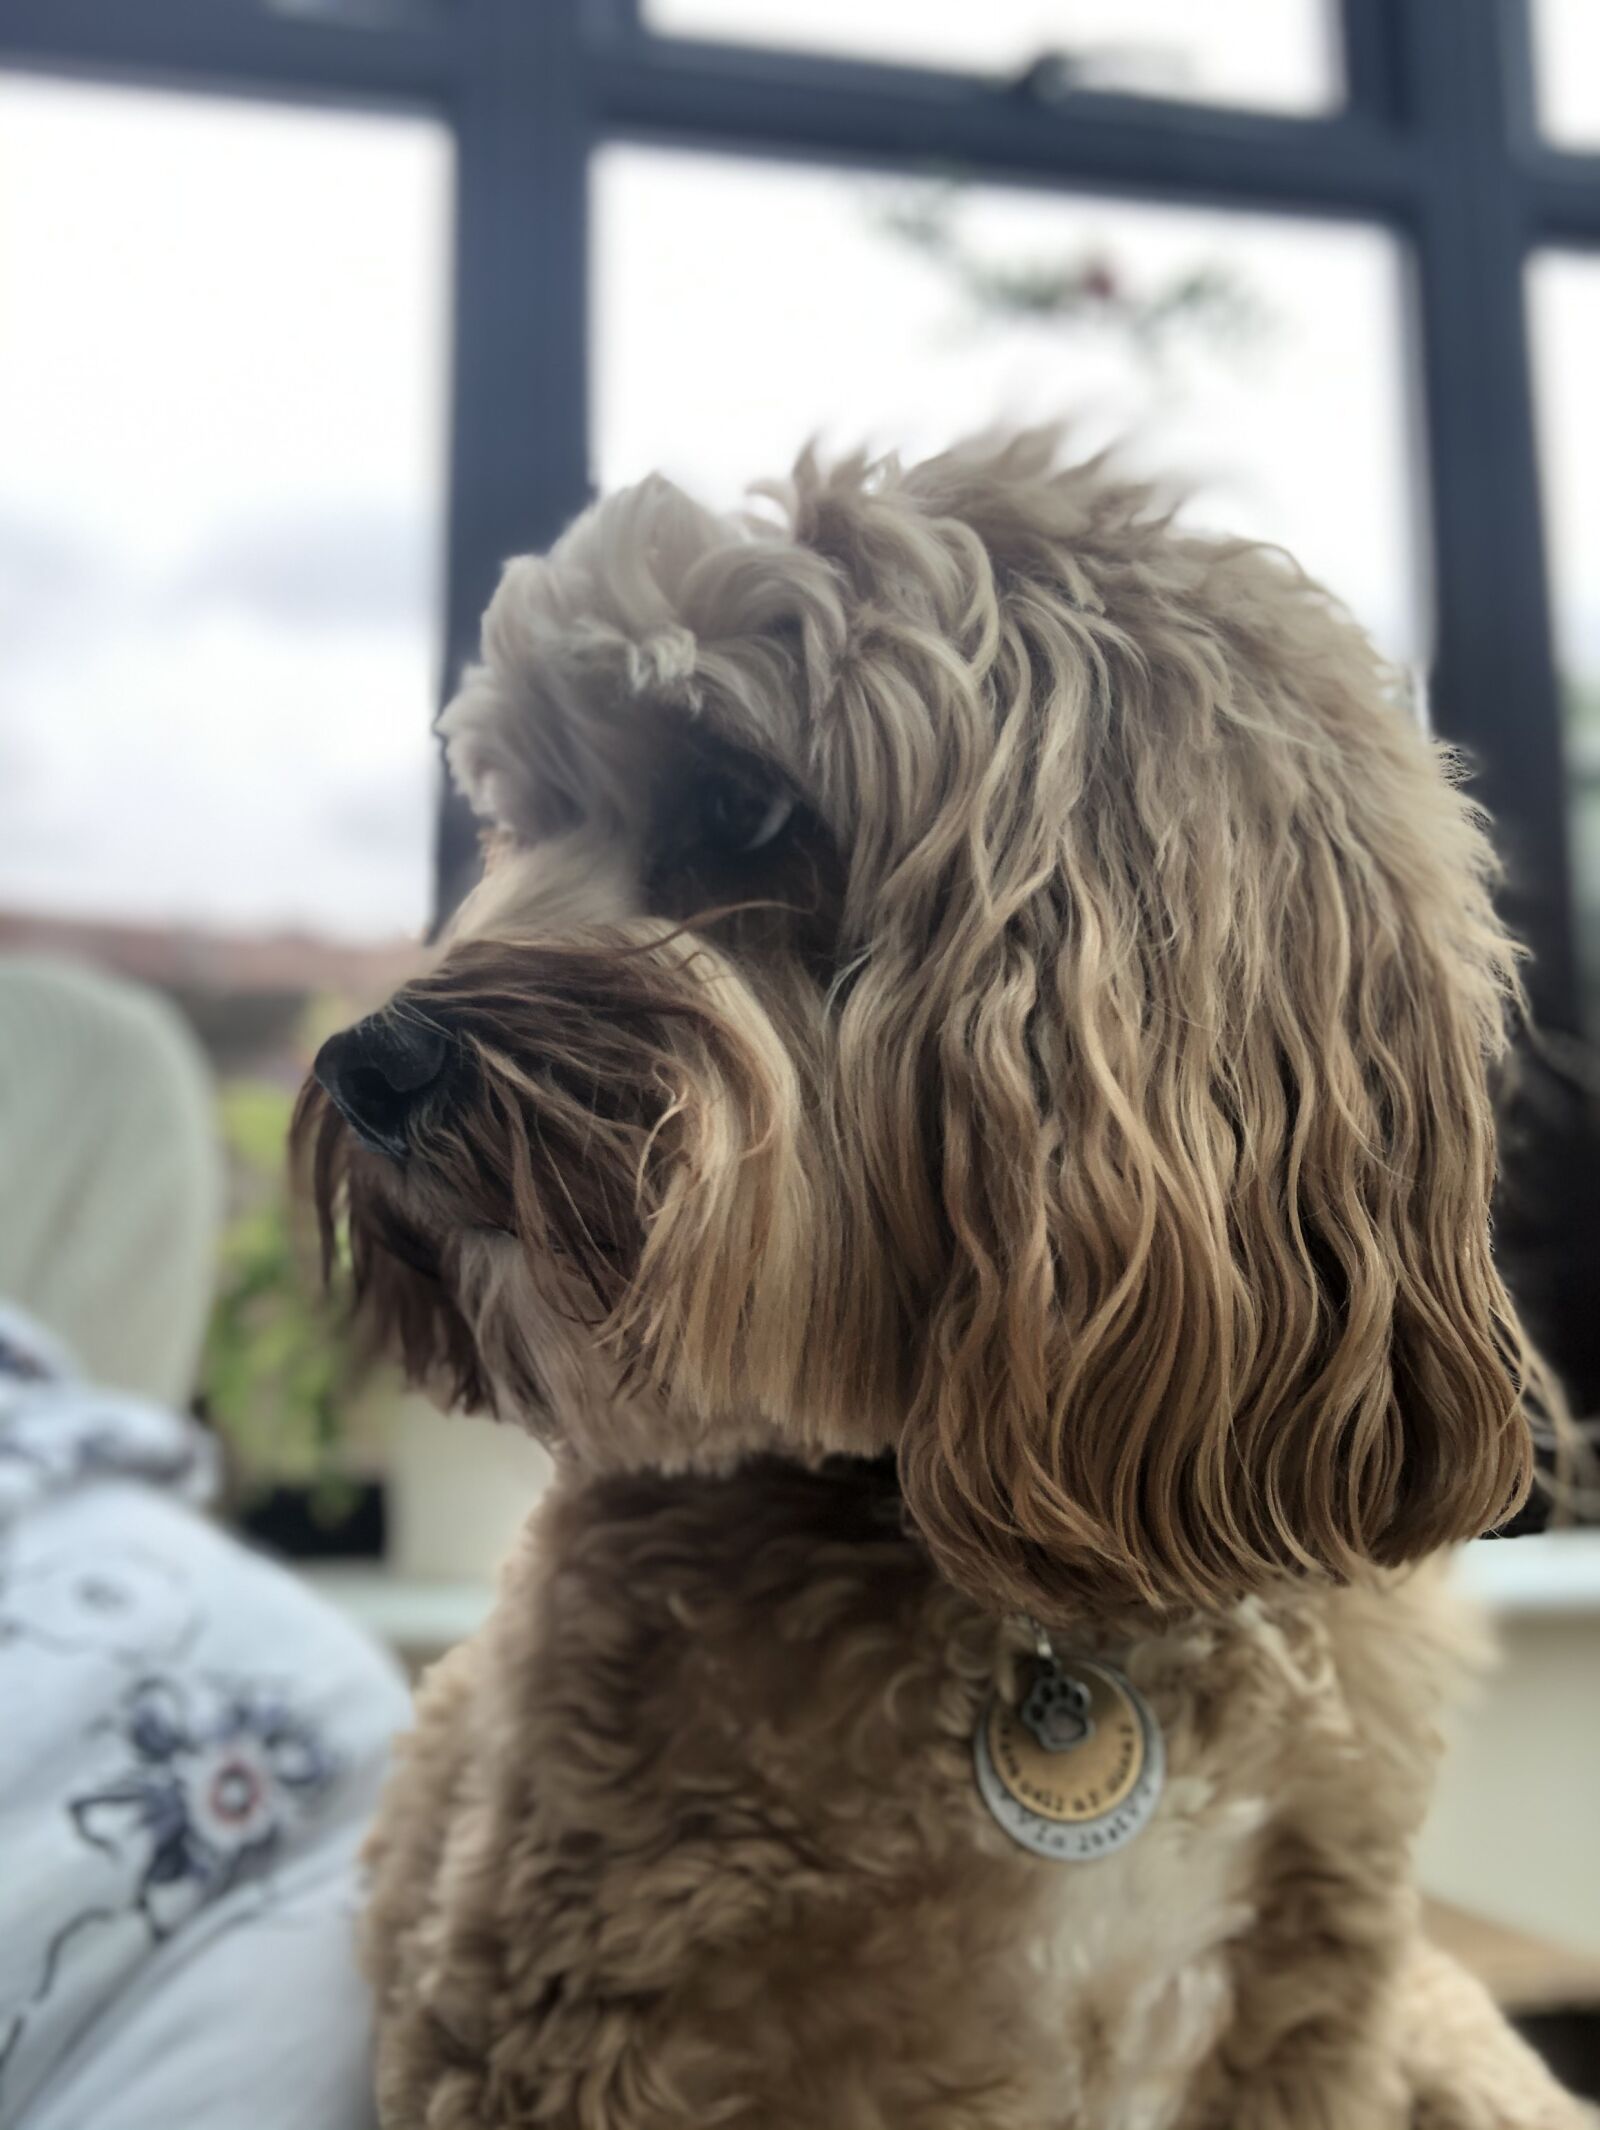 Apple iPhone X + iPhone X front TrueDepth camera 2.87mm f/2.2 sample photo. Cockapoo, dog, cute photography